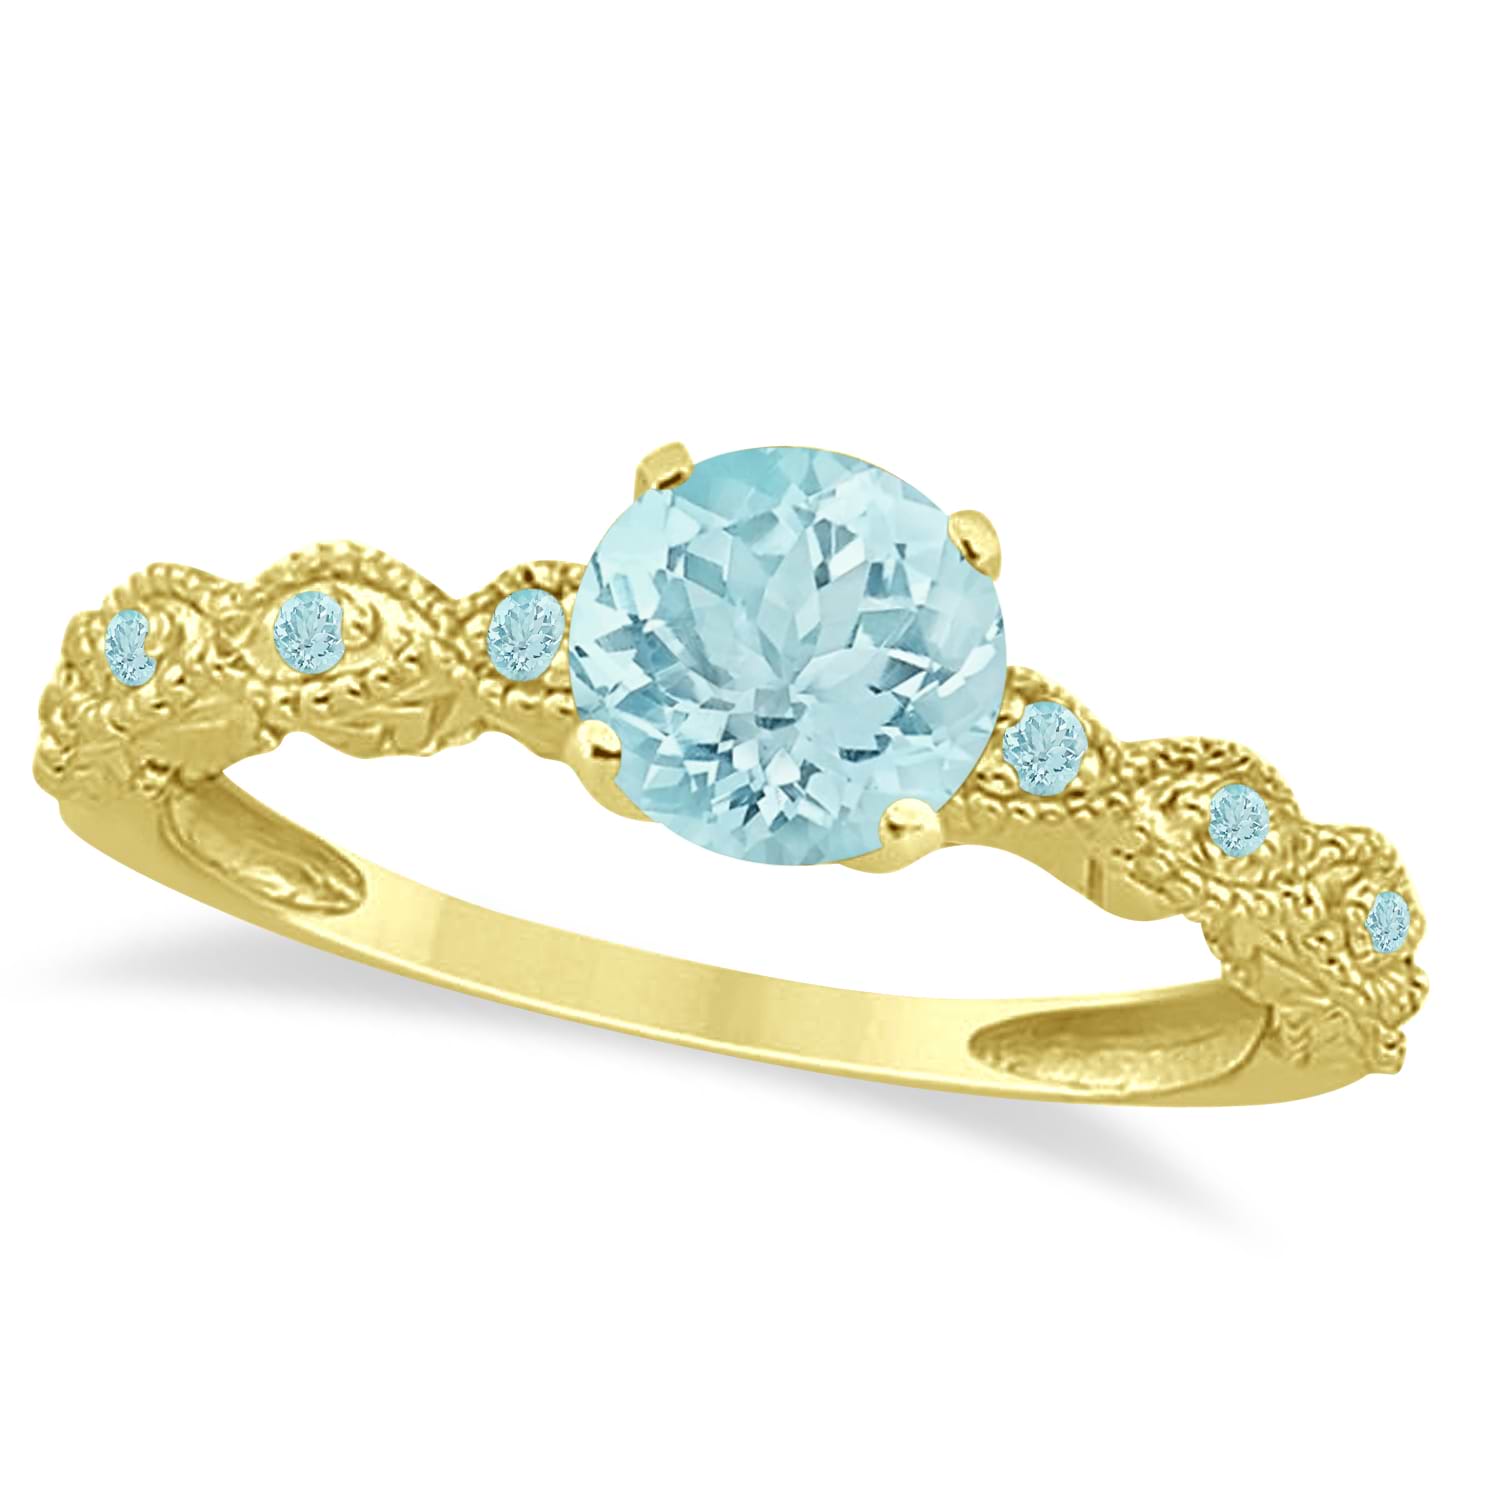 Vintage Style Aquamarine Engagement Ring in 18k Yellow Gold (1.18ct)